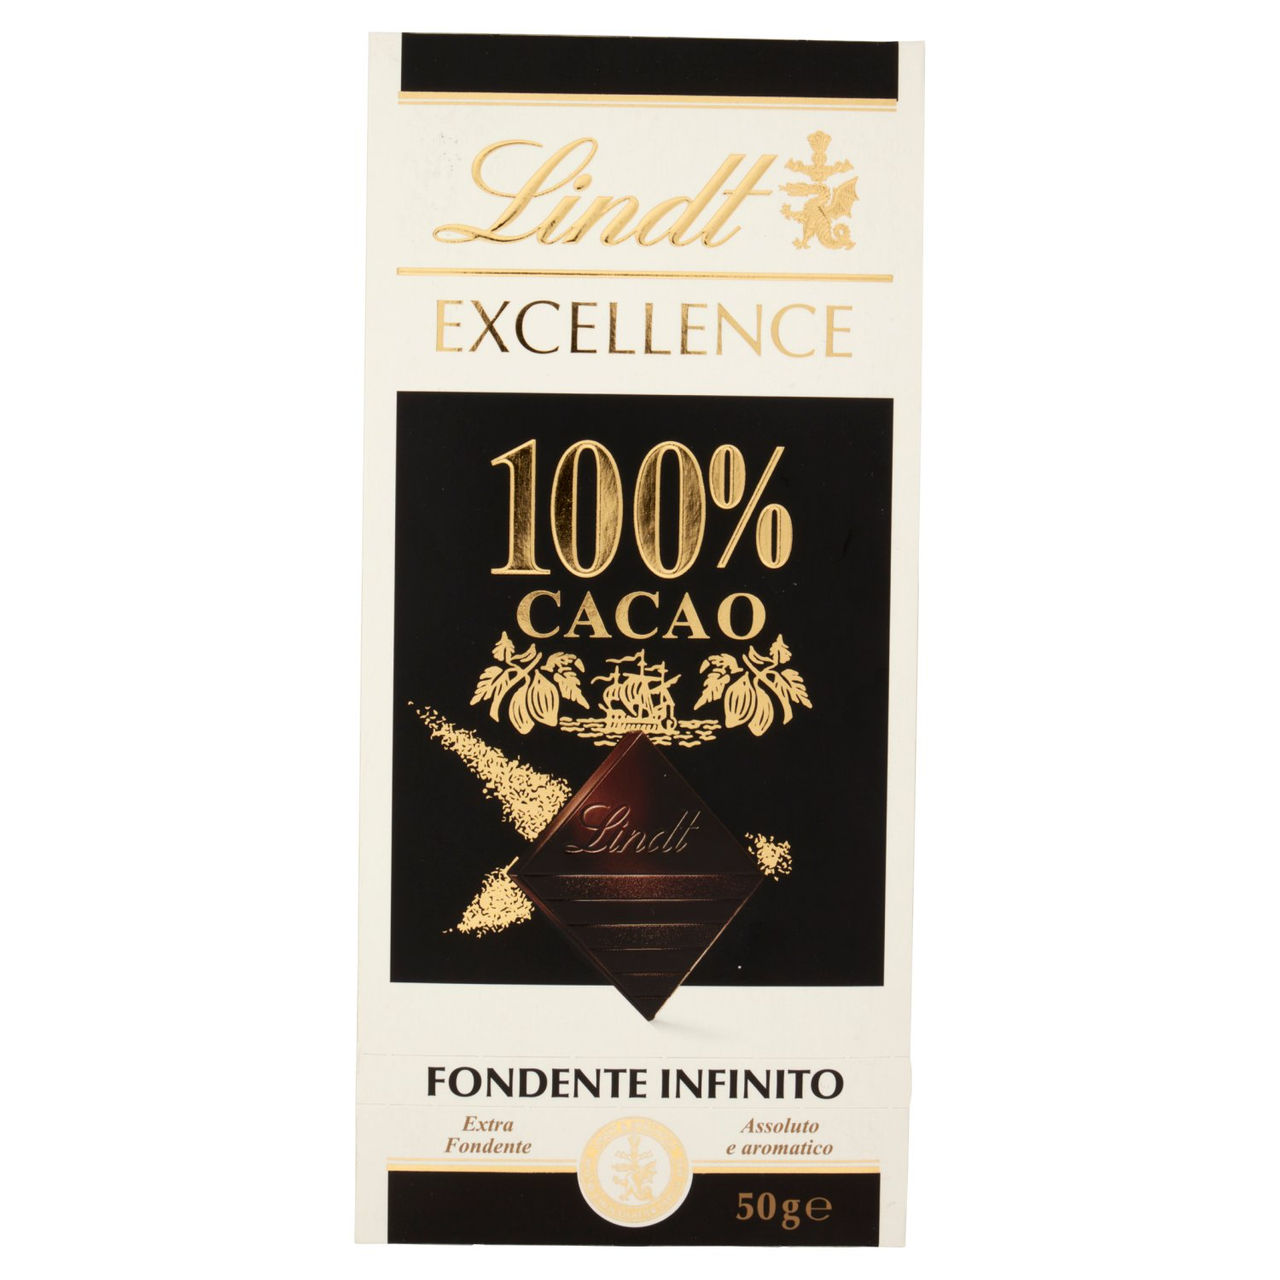 Lindt Excellence 100% Cacao Fondente Infinito